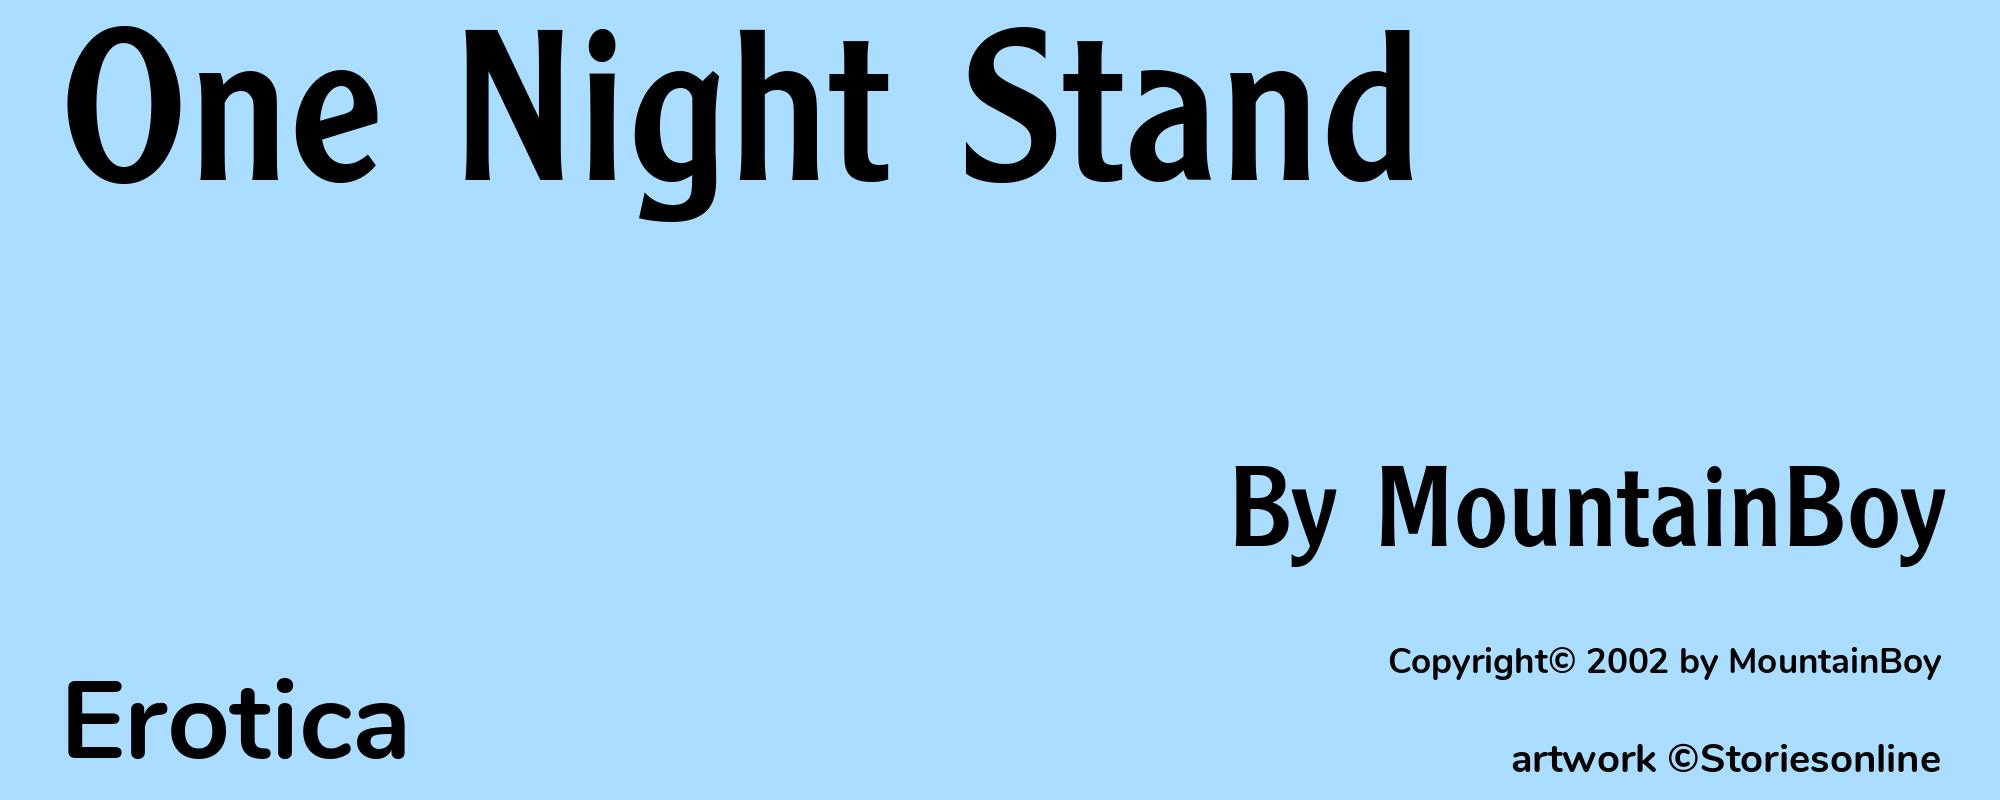 One Night Stand - Cover